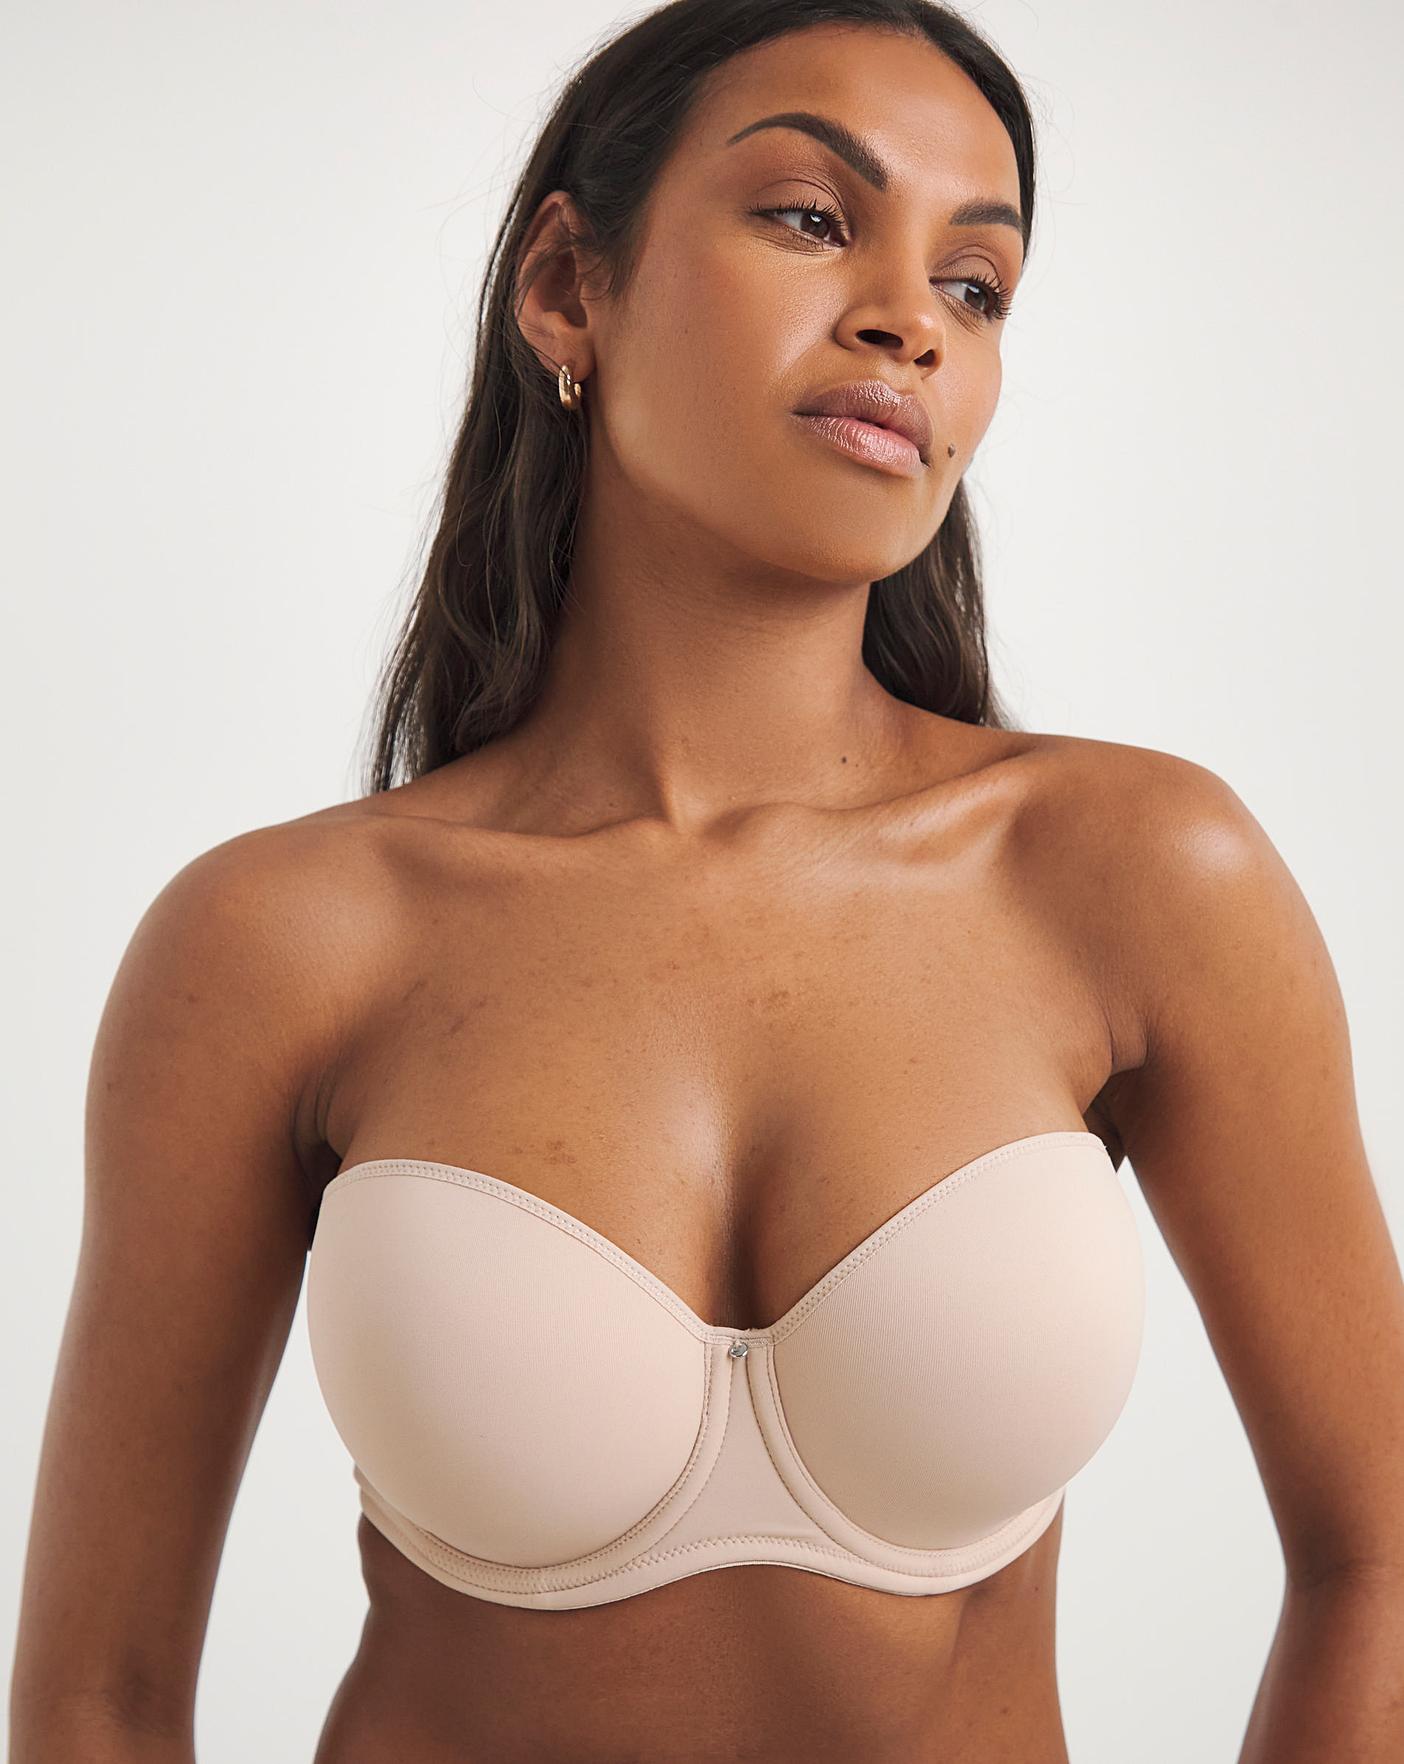 Strapless Bras 34GG, Bras for Large Breasts